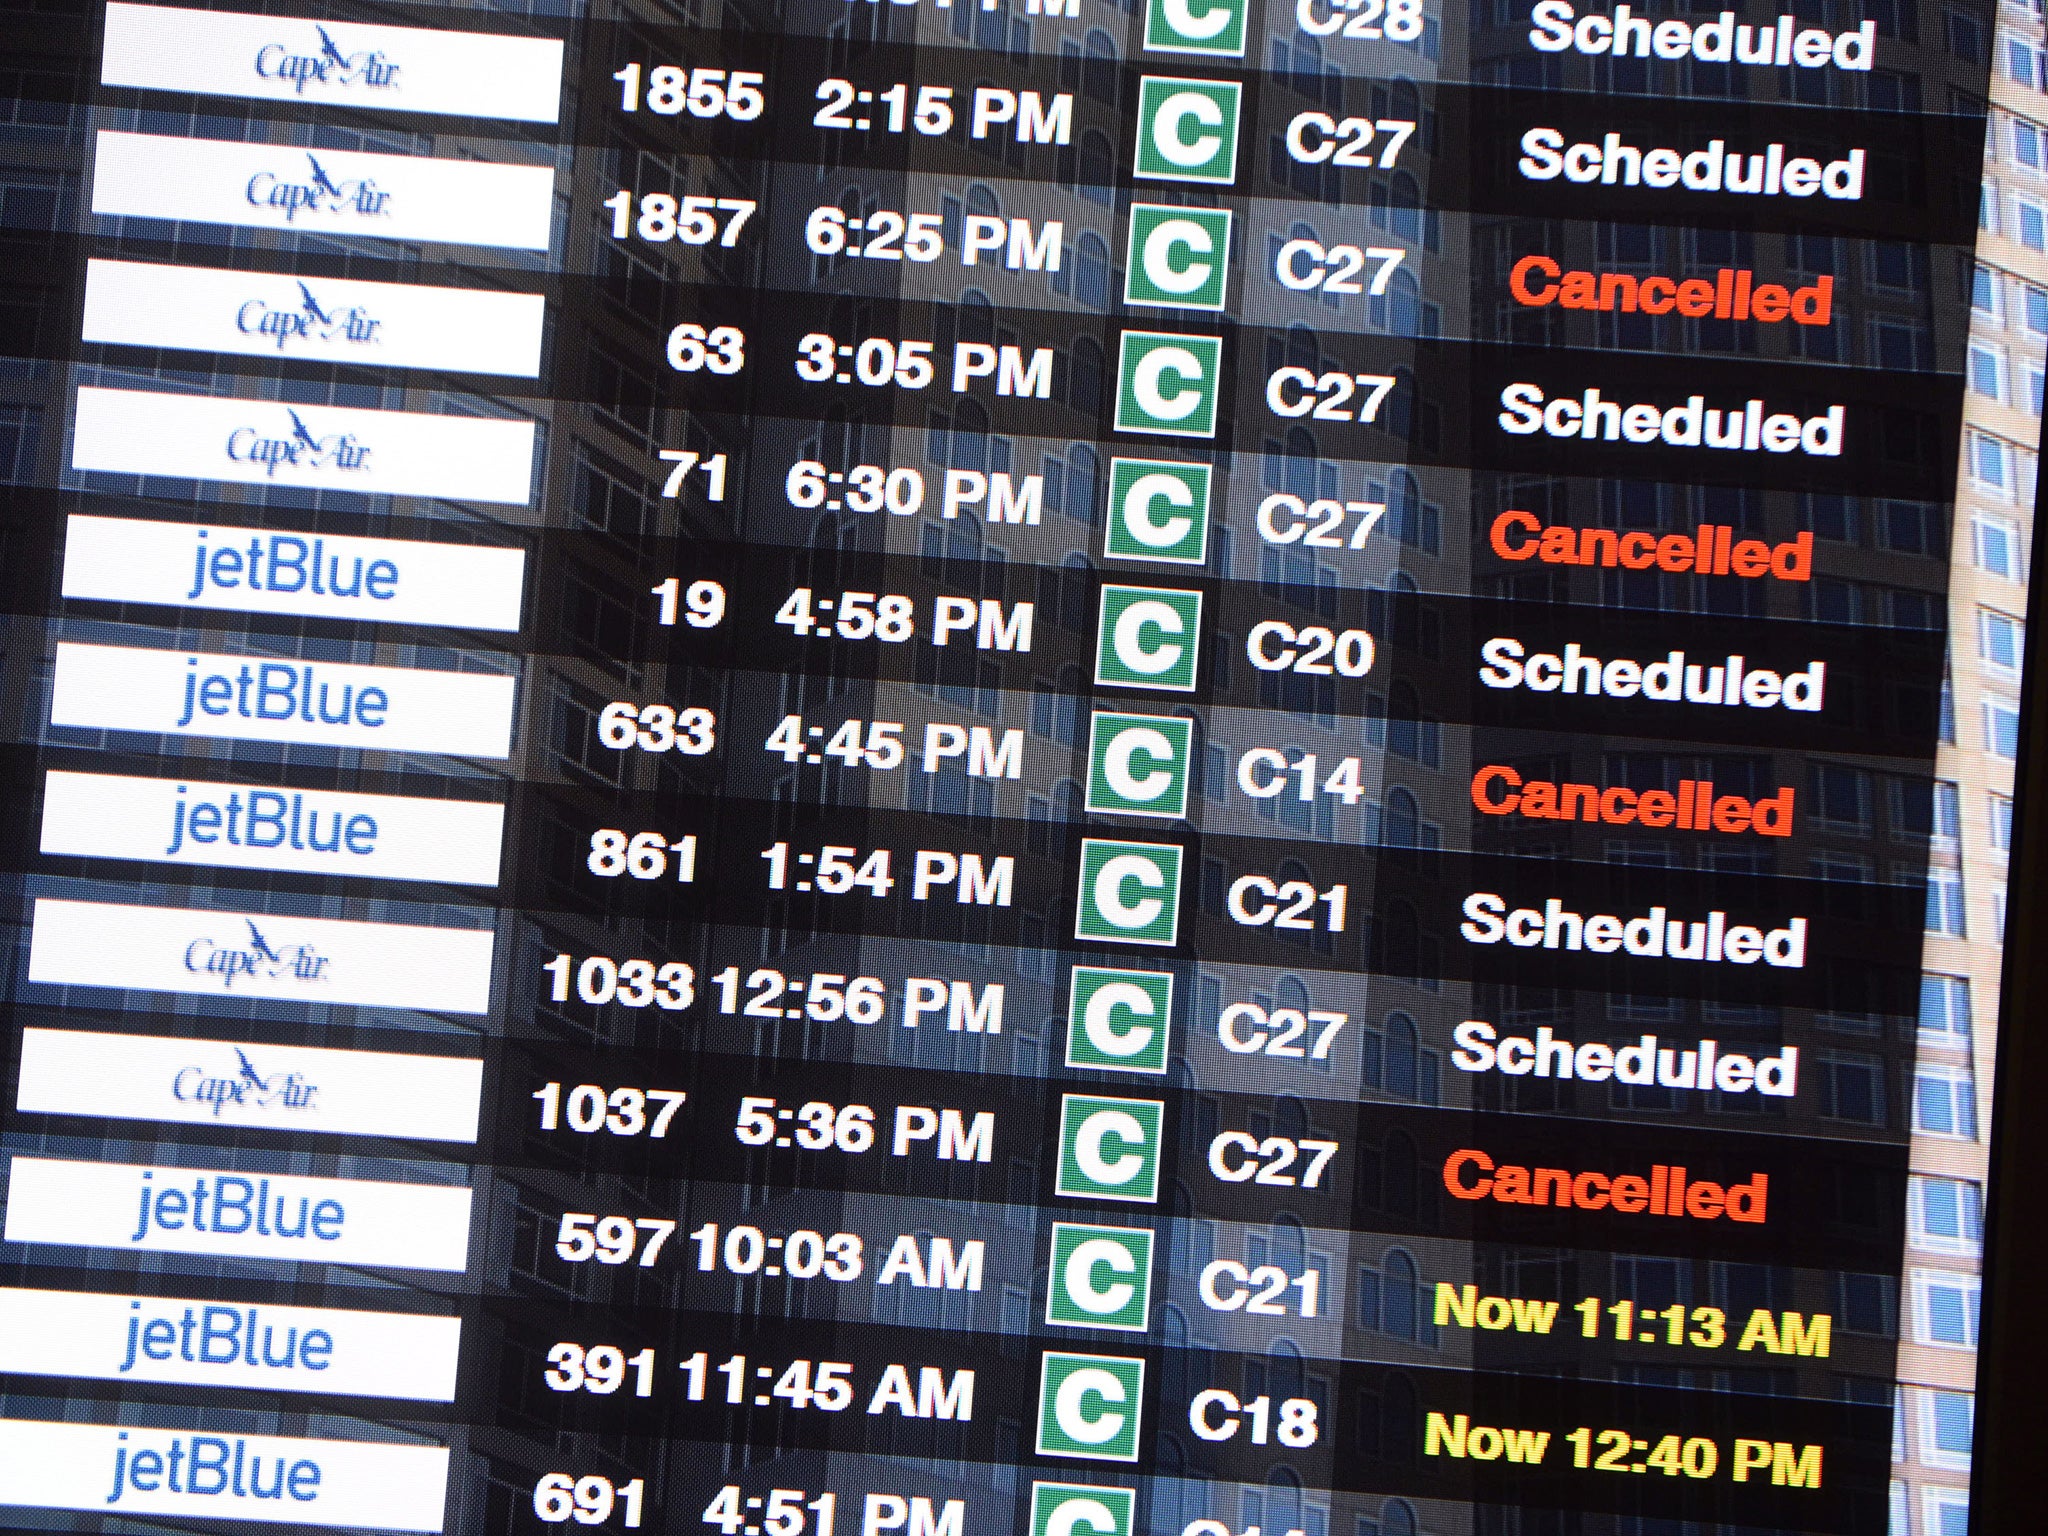 Any airline is at liberty to cancel flights without compensation, so long as they give at least two weeks’ notice